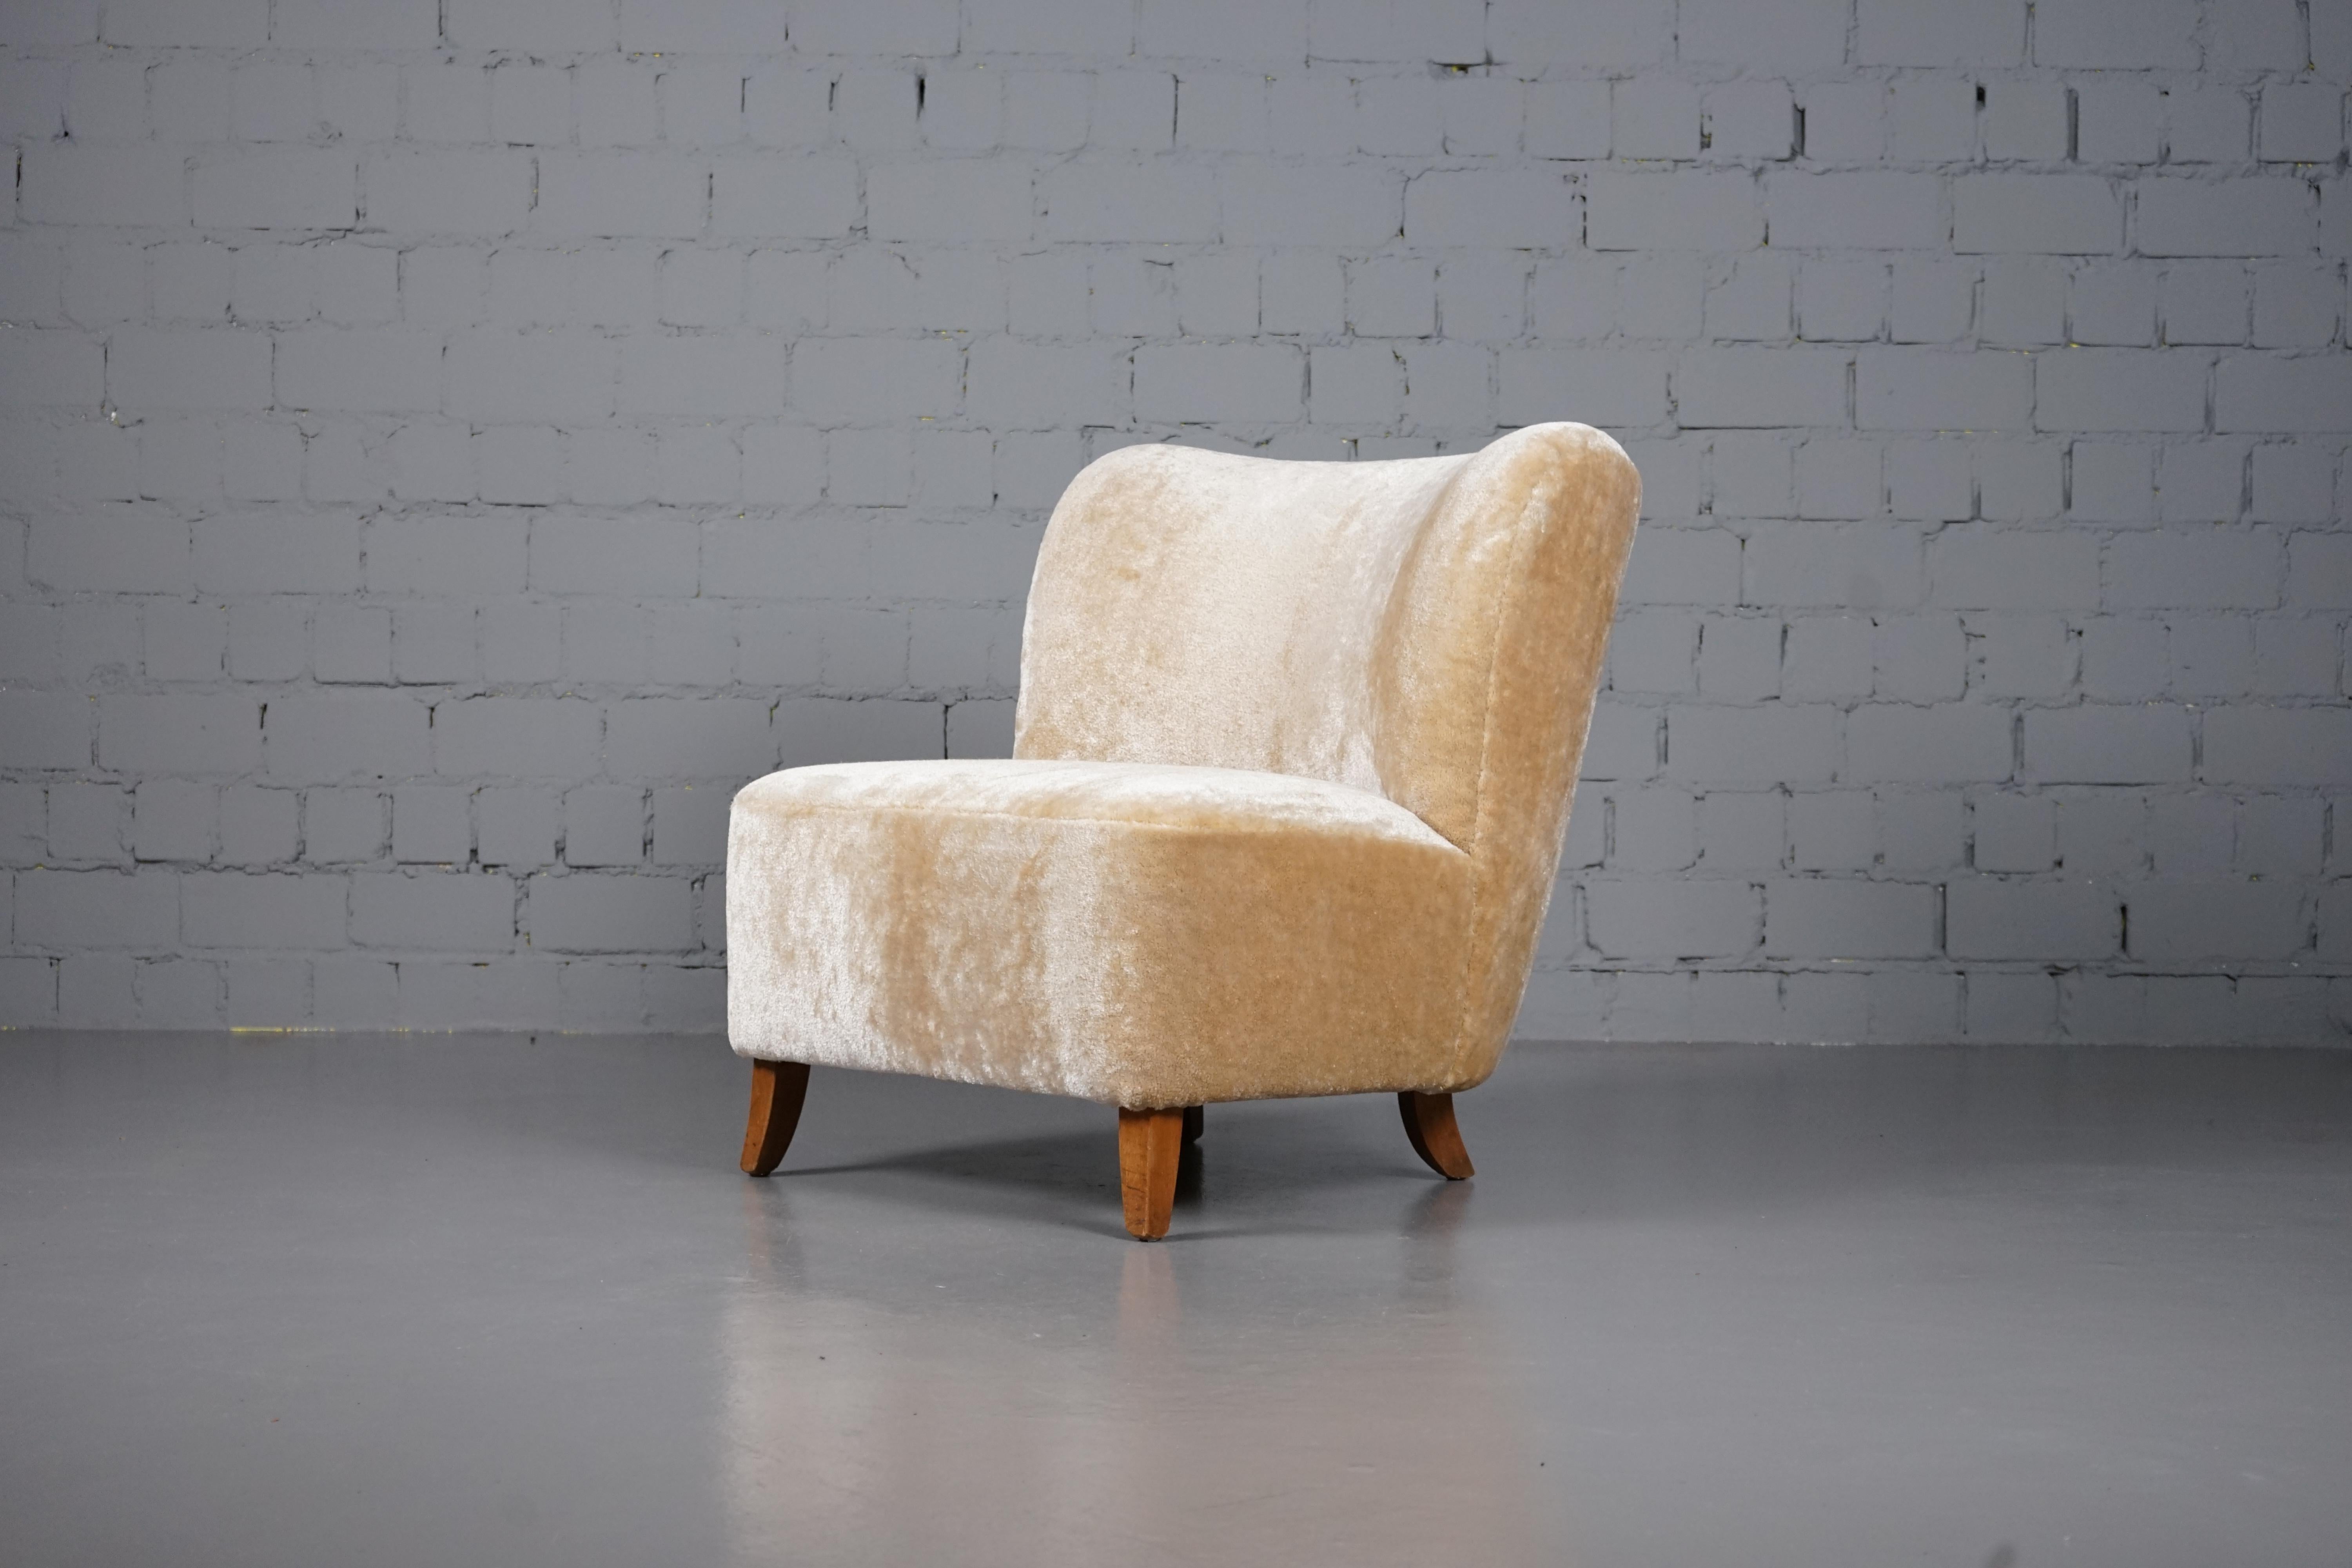 Amazing scandinavian armchair covered with high pile velvet fabric from the golden Mid-Century Modern era.
The armchair came from the estate of an architect and was loved by its owner. We gave him a new life by selecting the finest velvet fabric